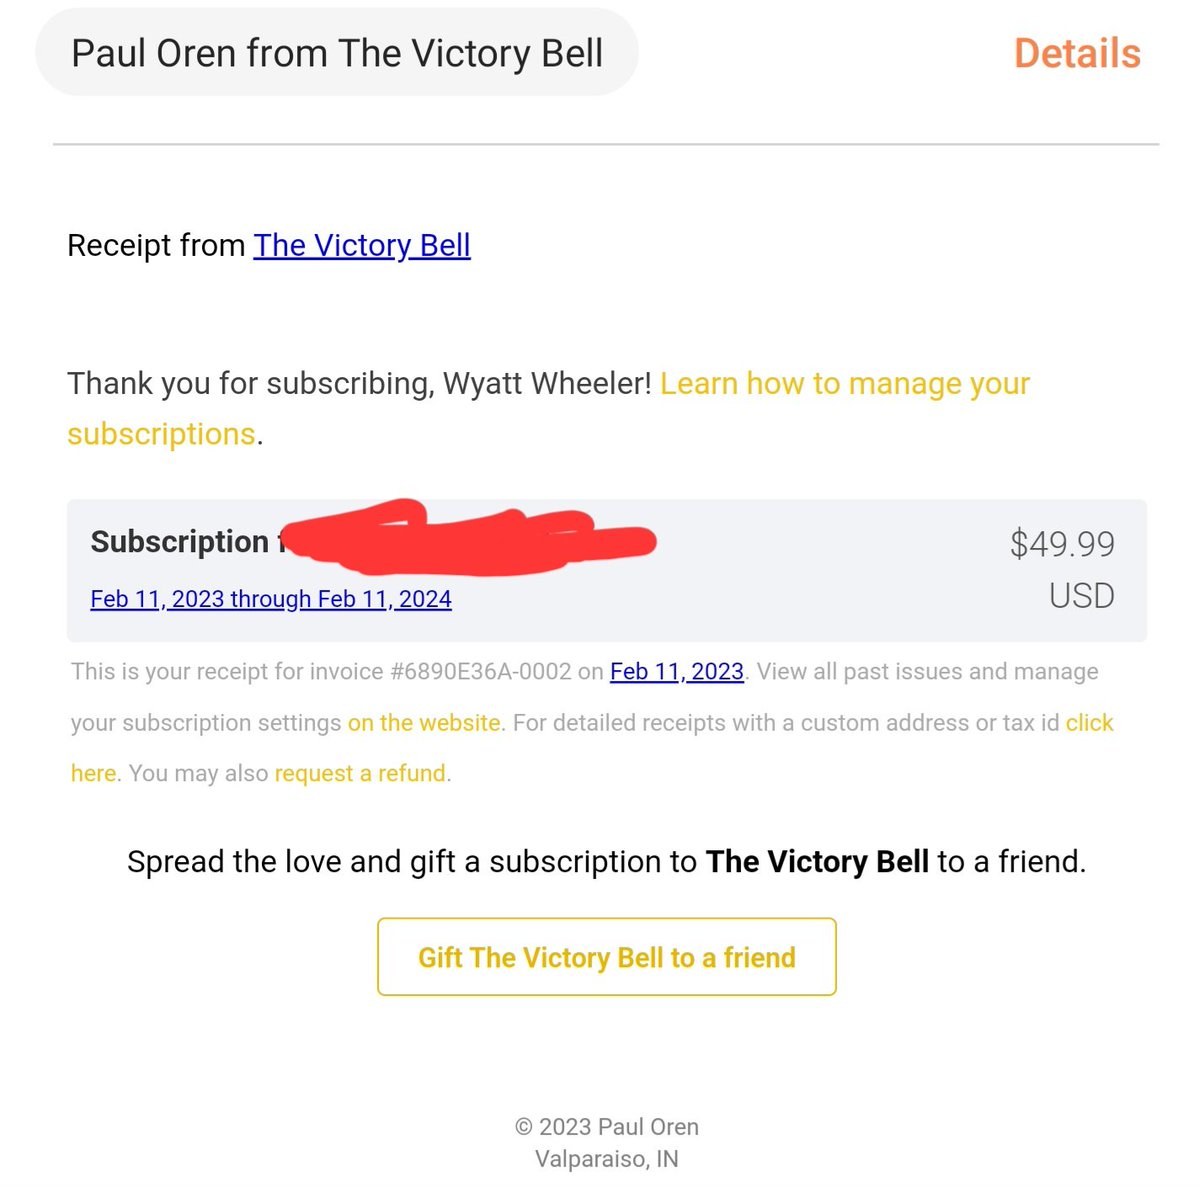 Year 2, baby.

Support @TVBOren by subscribing to The Victory Bell. thevictorybell.com